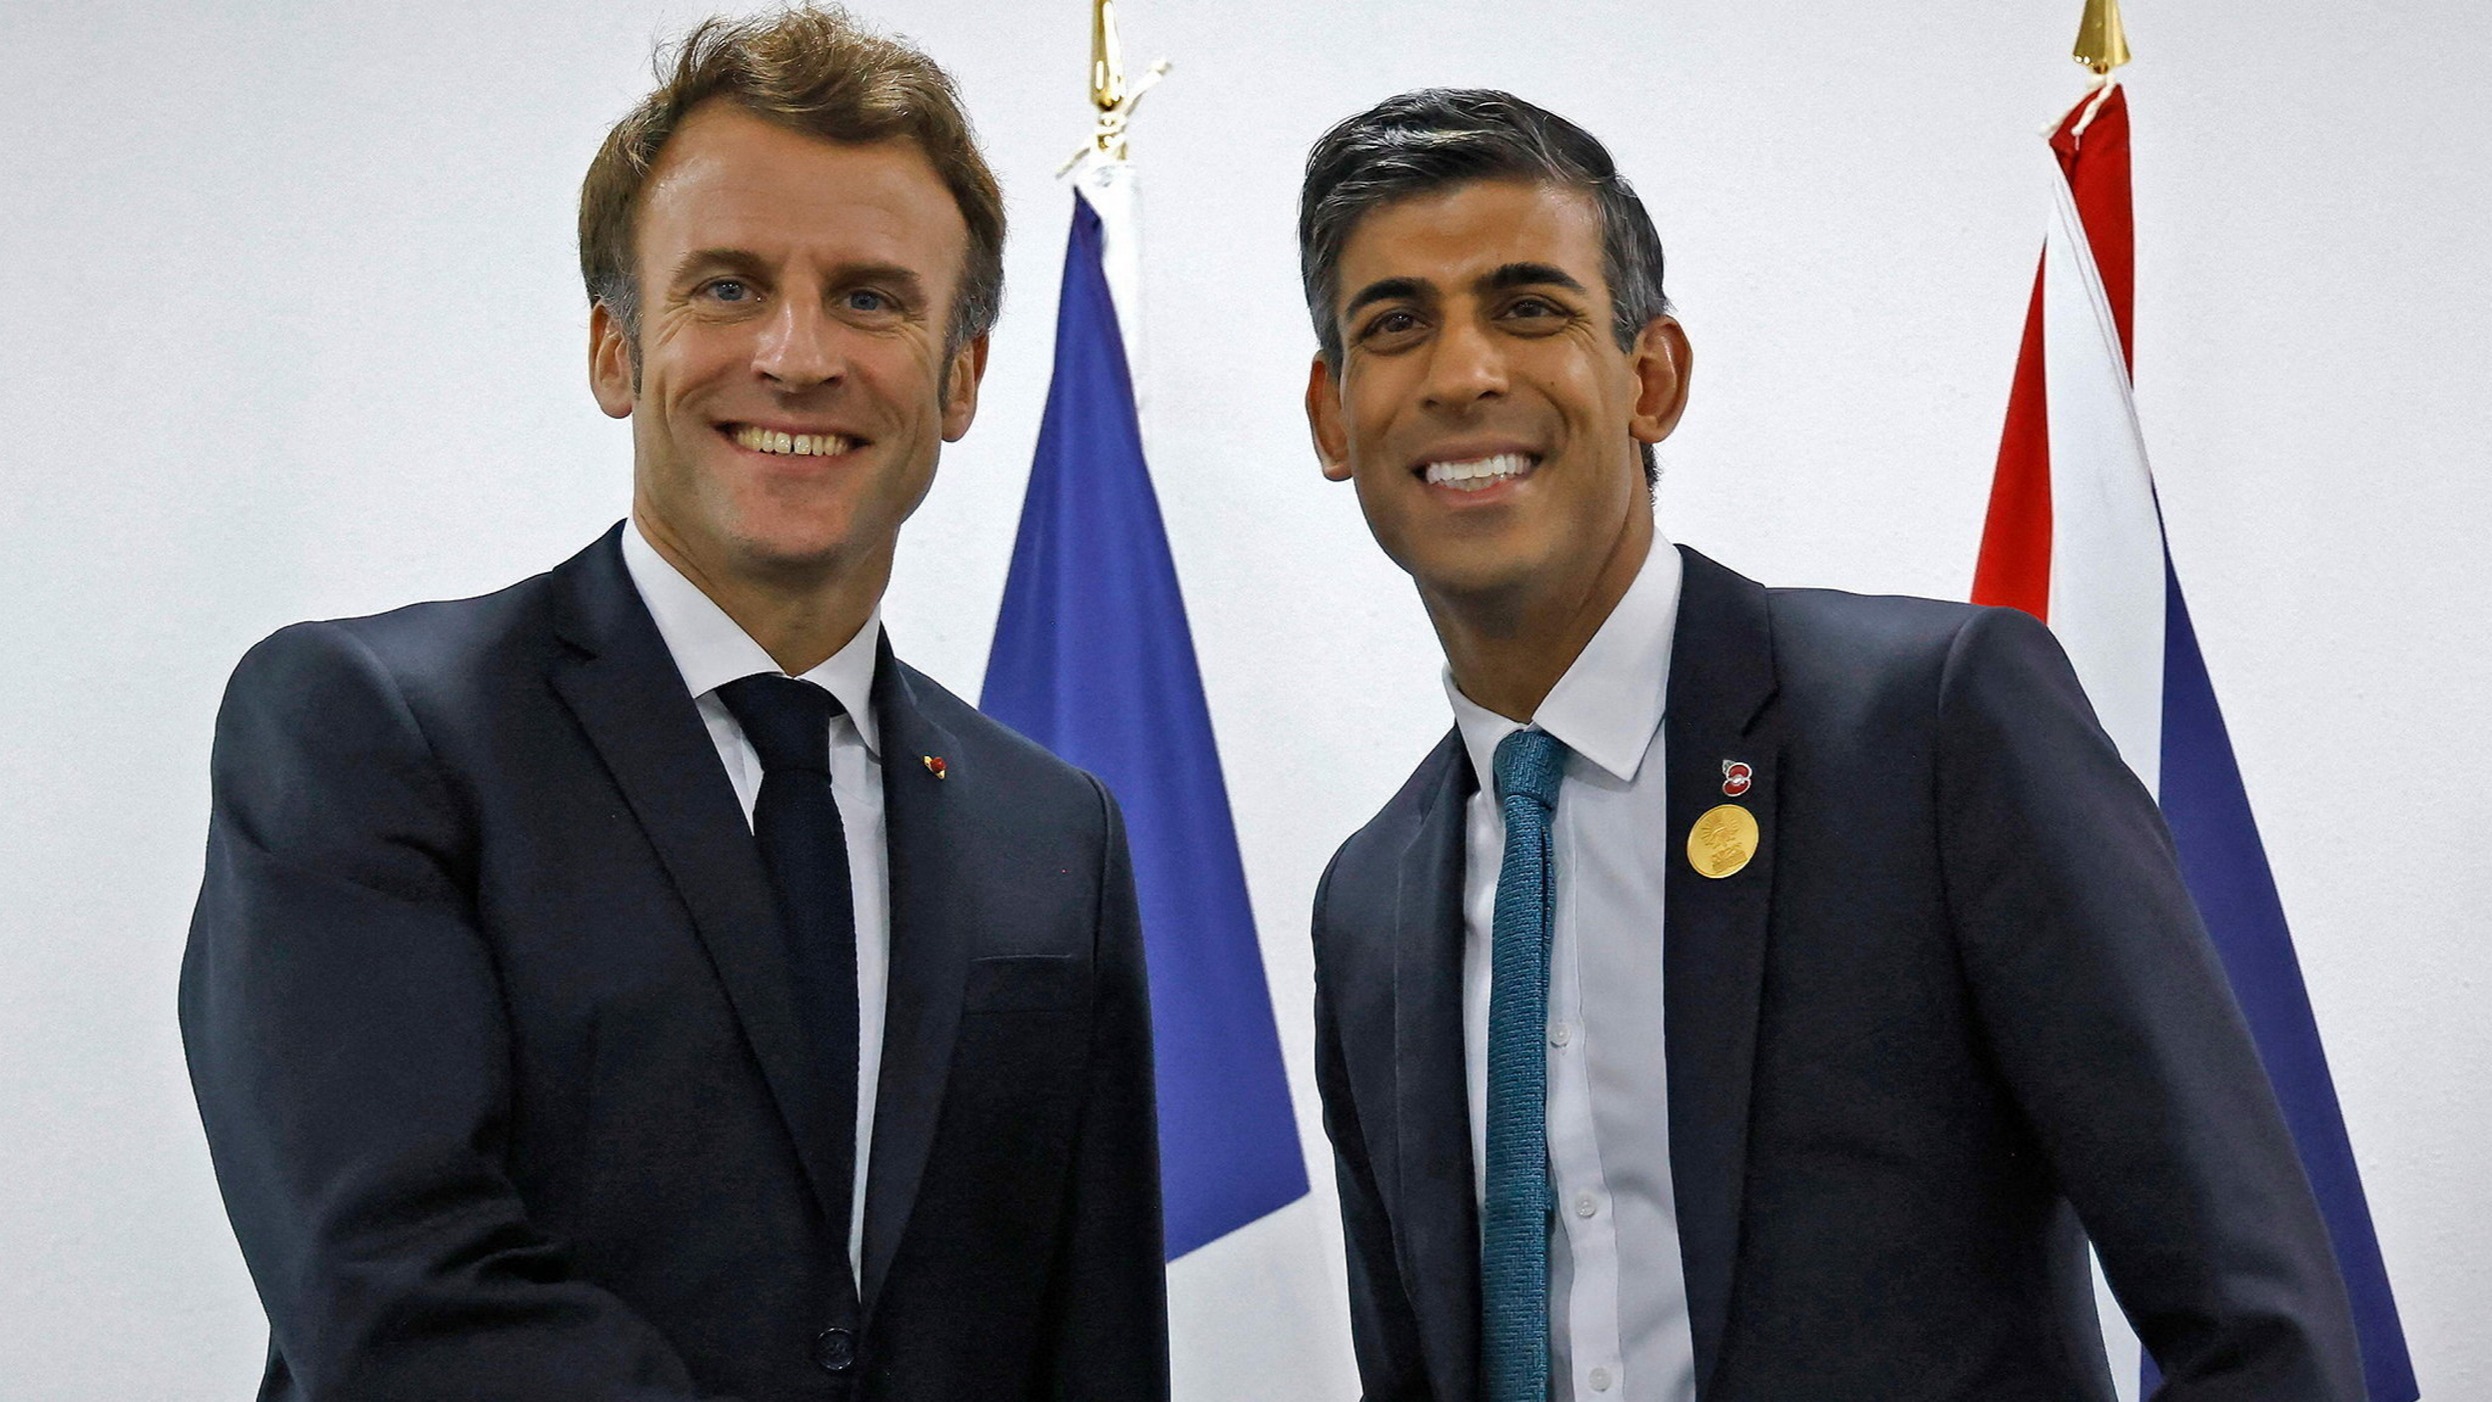 French president Emmanuel Macron, left, and UK prime minister Rishi Sunak. The relationship between France and Britain has been fraught in recent years © Ludovic Marin/AFP/Getty Images